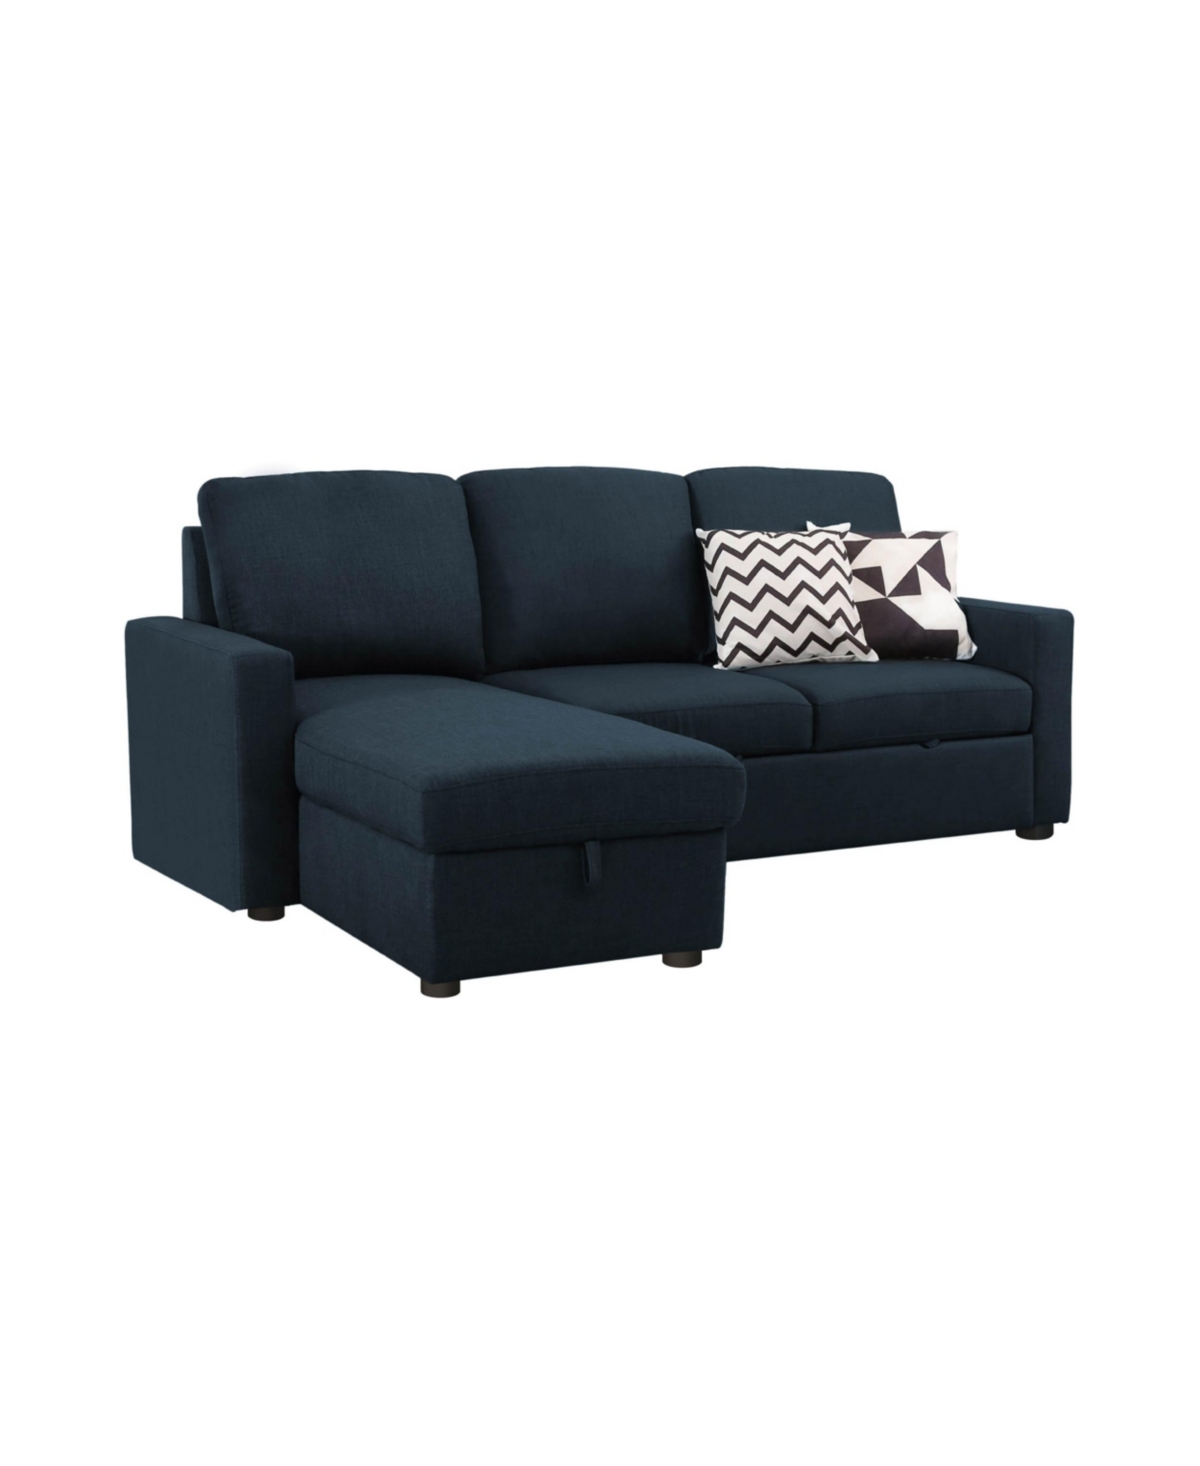 Abbyson Living Newton 2 Piece Storage Sofa Bed Sectional In Navy Blue